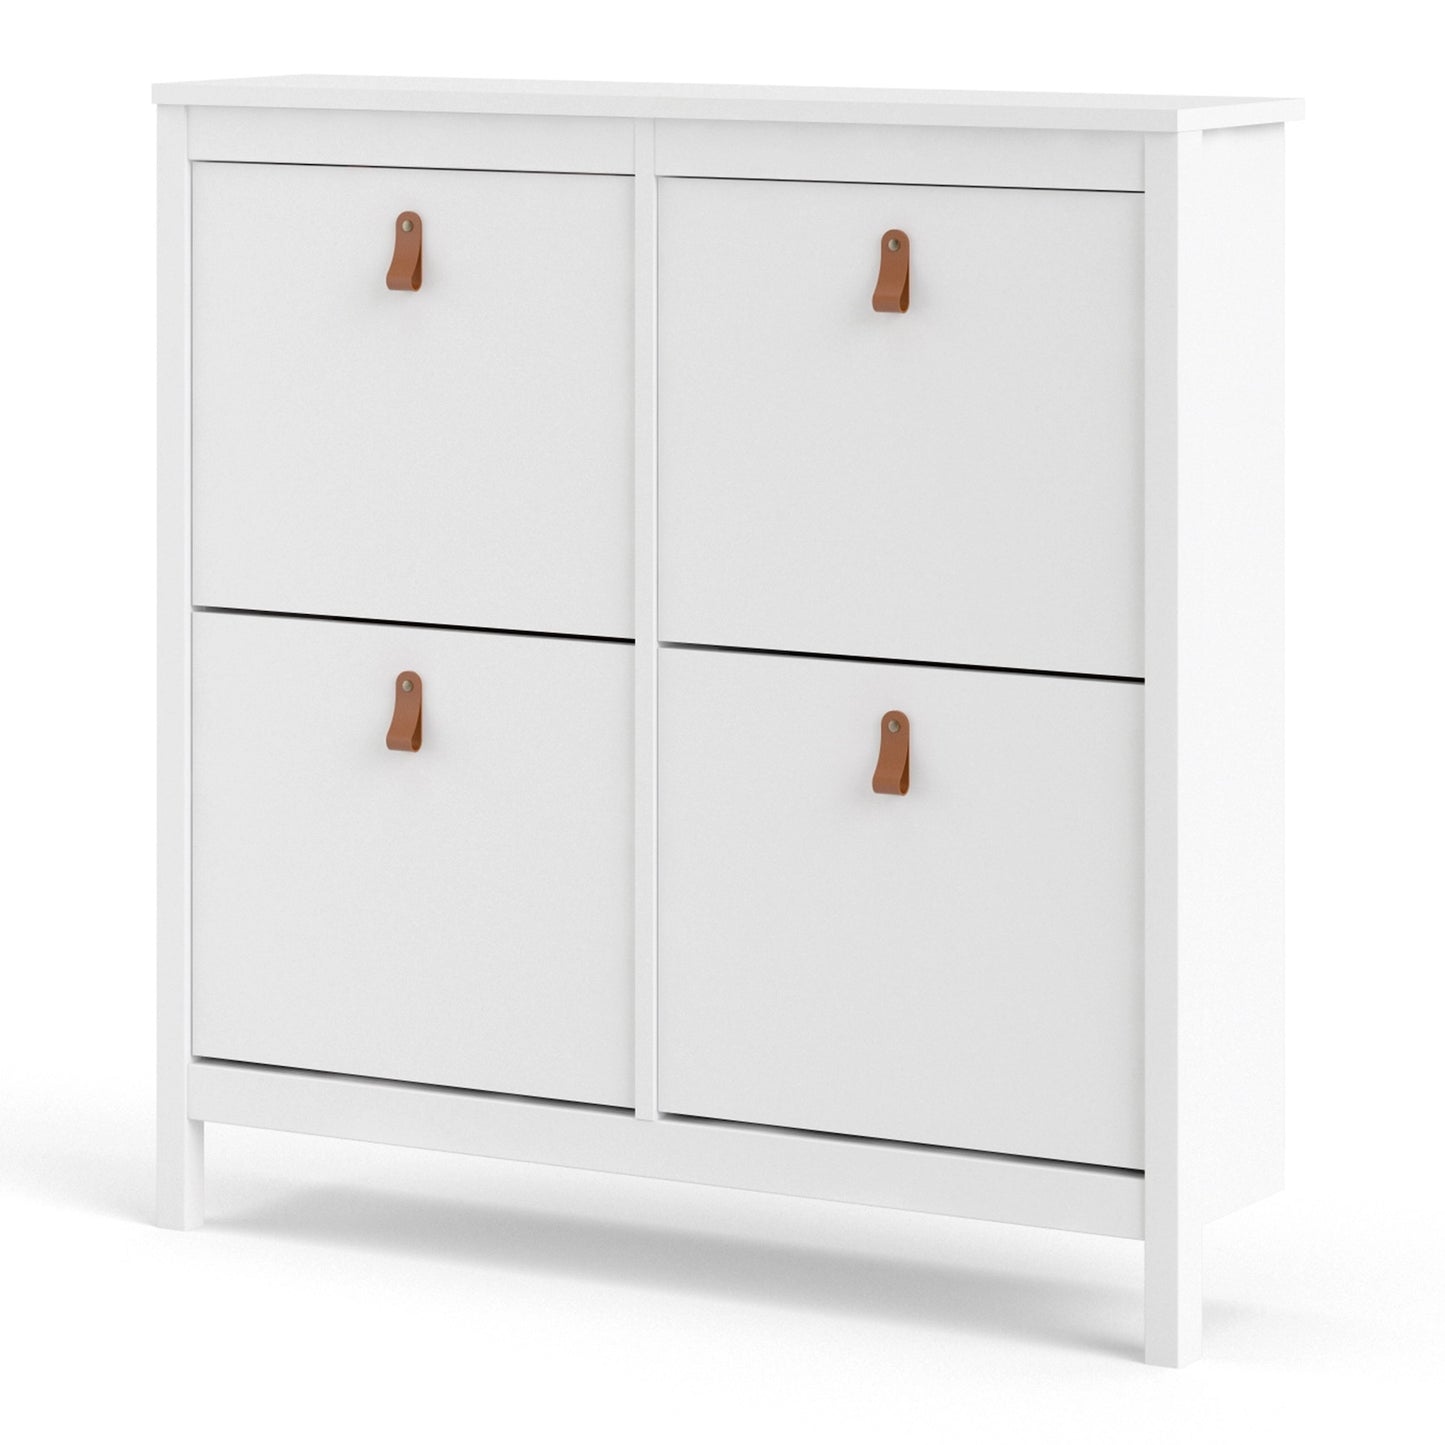 Furniture To Go Barcelona Shoe Cabinet 4 Compartments in White